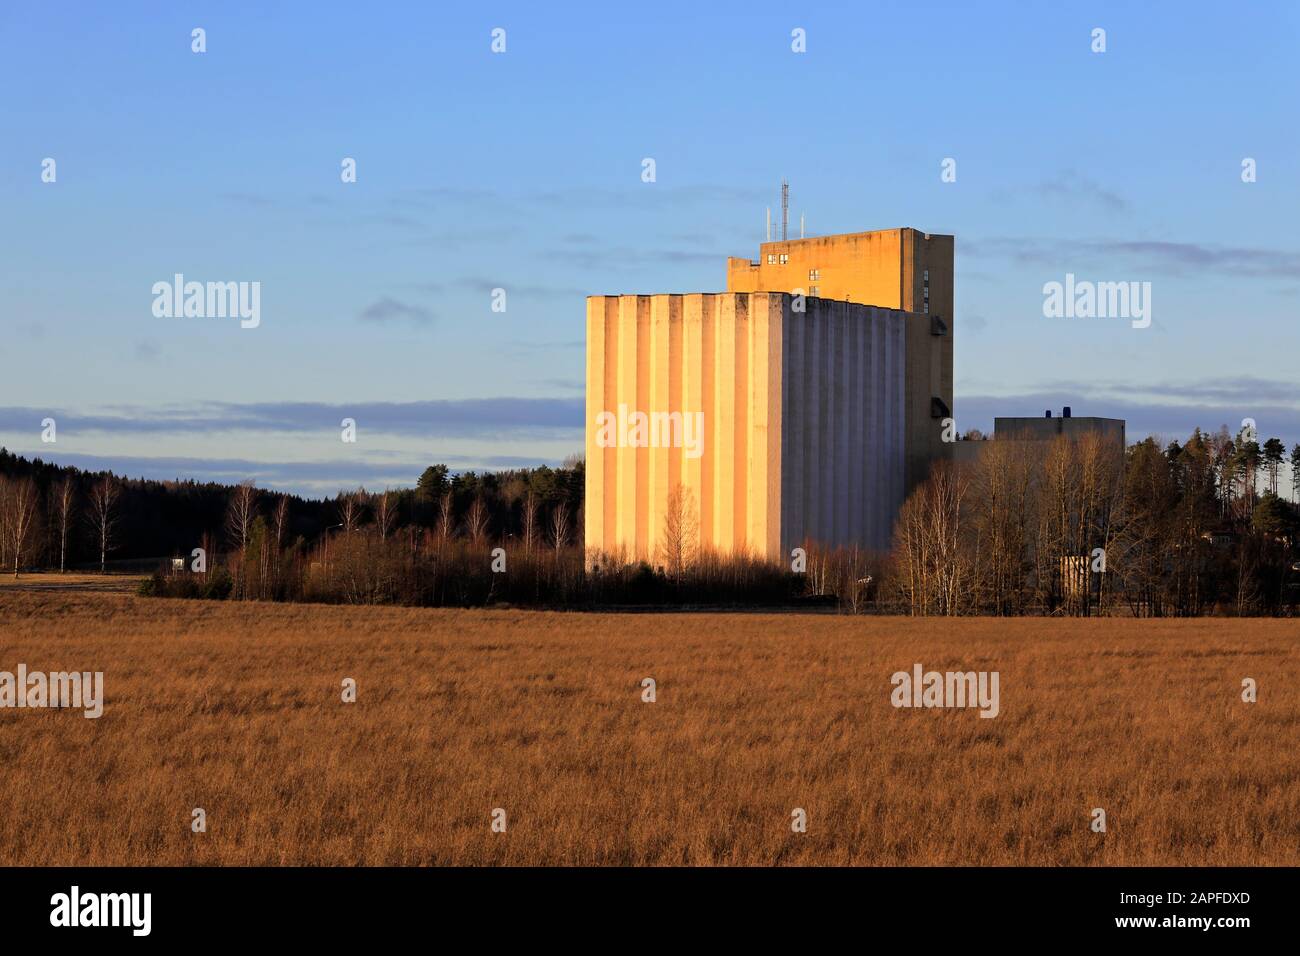 Pernio Granary, grain elevator of Suomen Viljava Oy seen across fields in golden light of sunset. This landmark in Salo is owned by State of Finland. Stock Photo